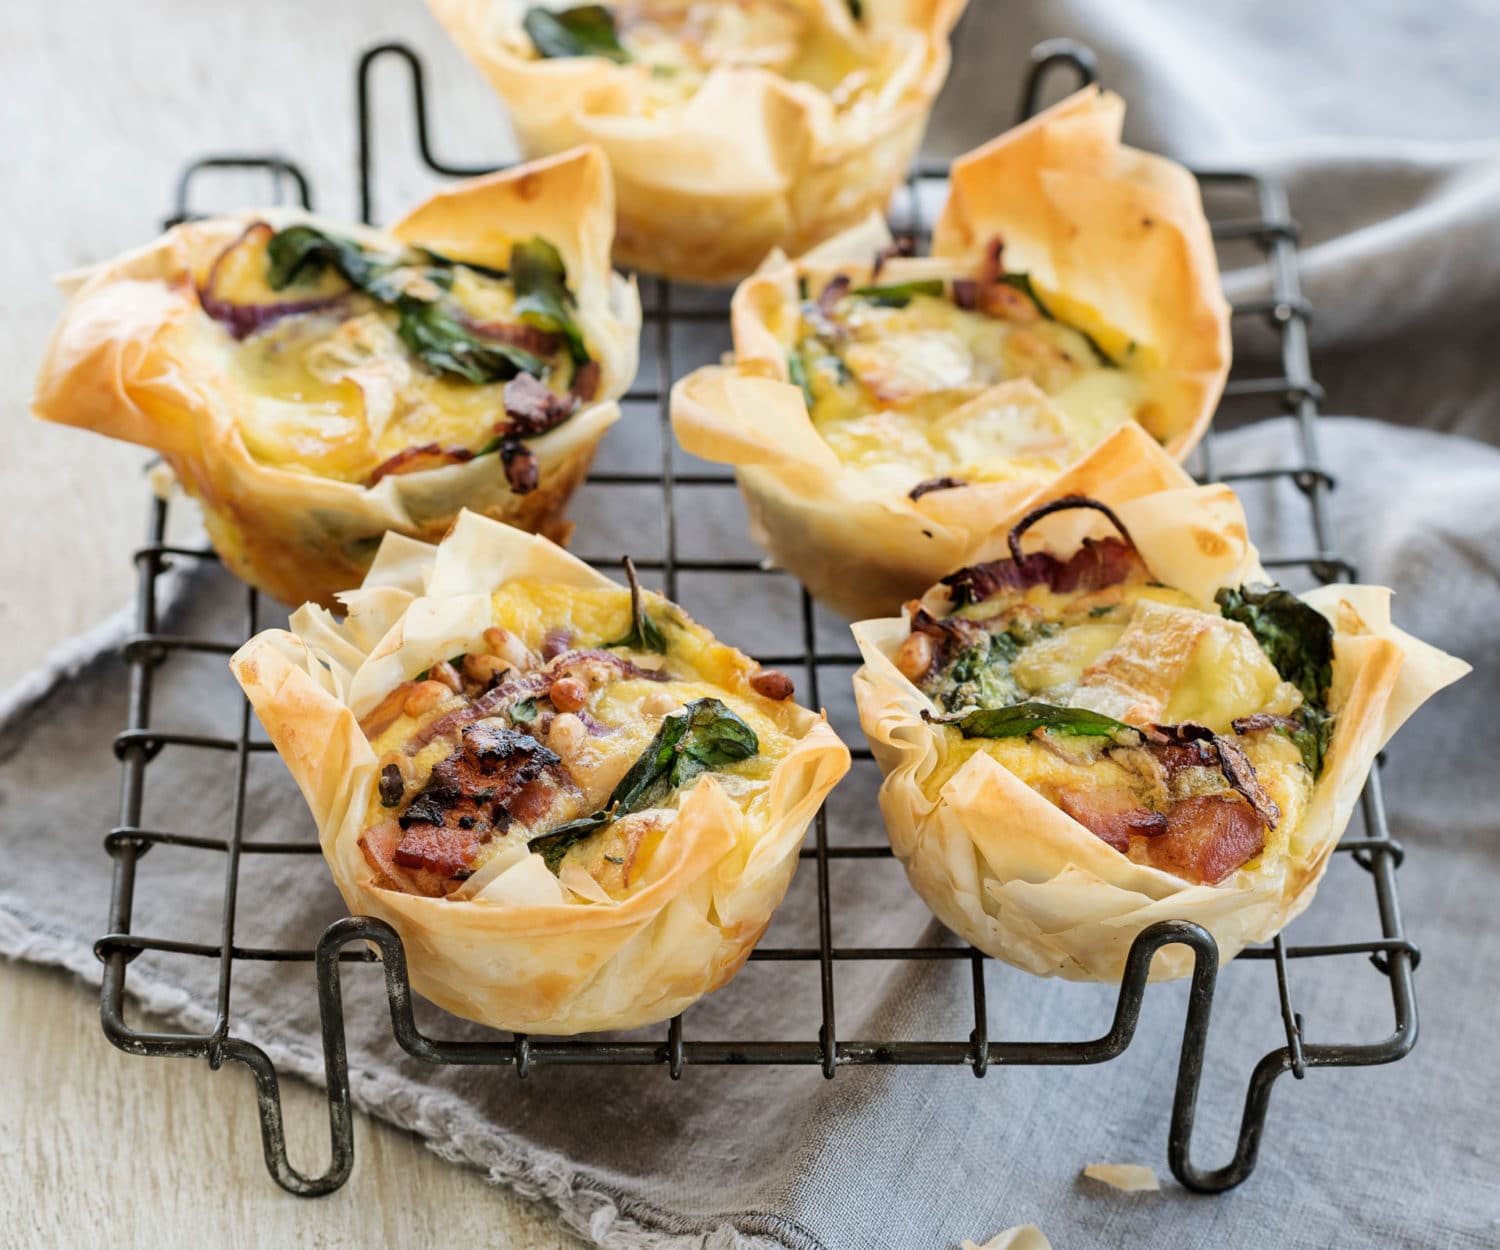 Brie and bacon filo nests - Nadia Lim